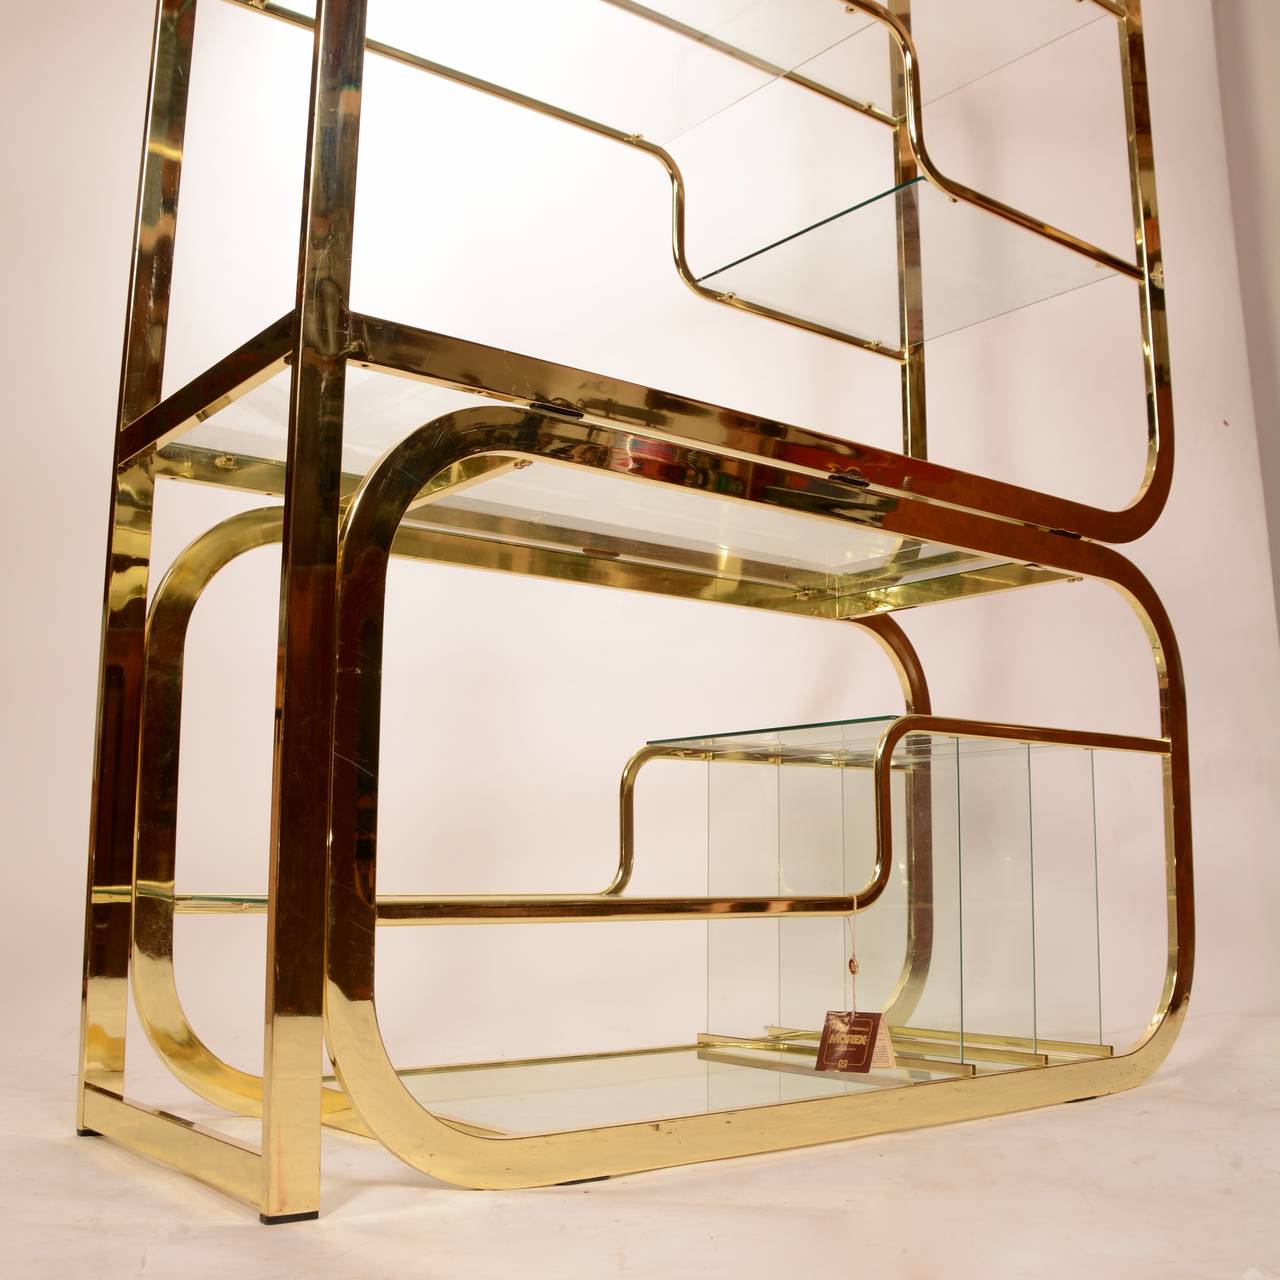 20th Century Mid-Century Modern Brass and Glass Etagere by Milo Baughman for Morex of Italy